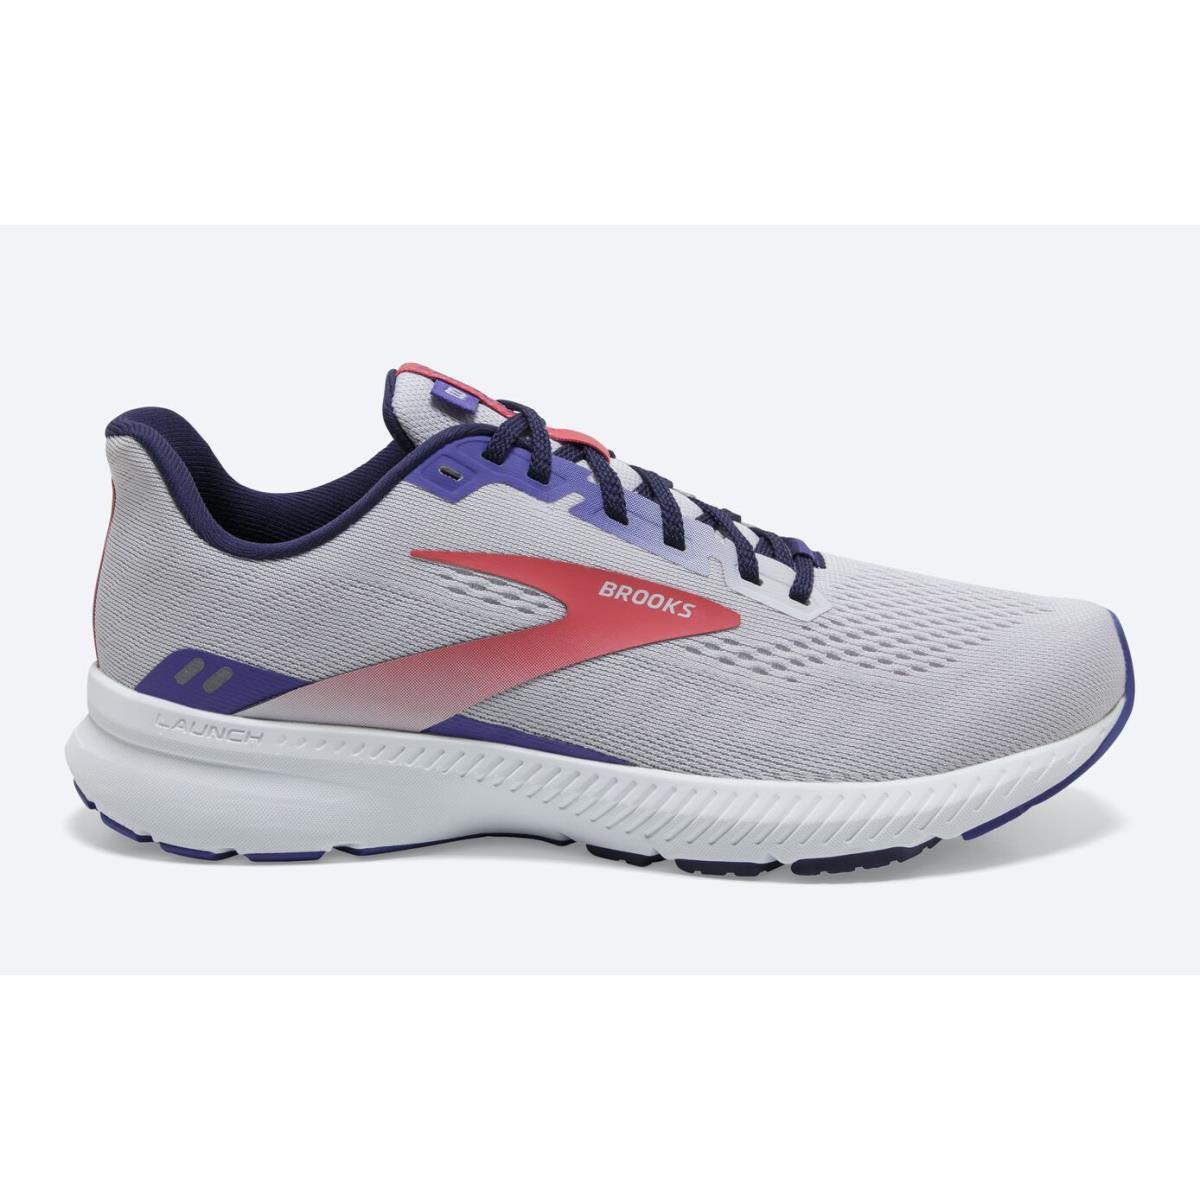 Brooks shoes Cascadia - Lavender/Astral/Coral 0